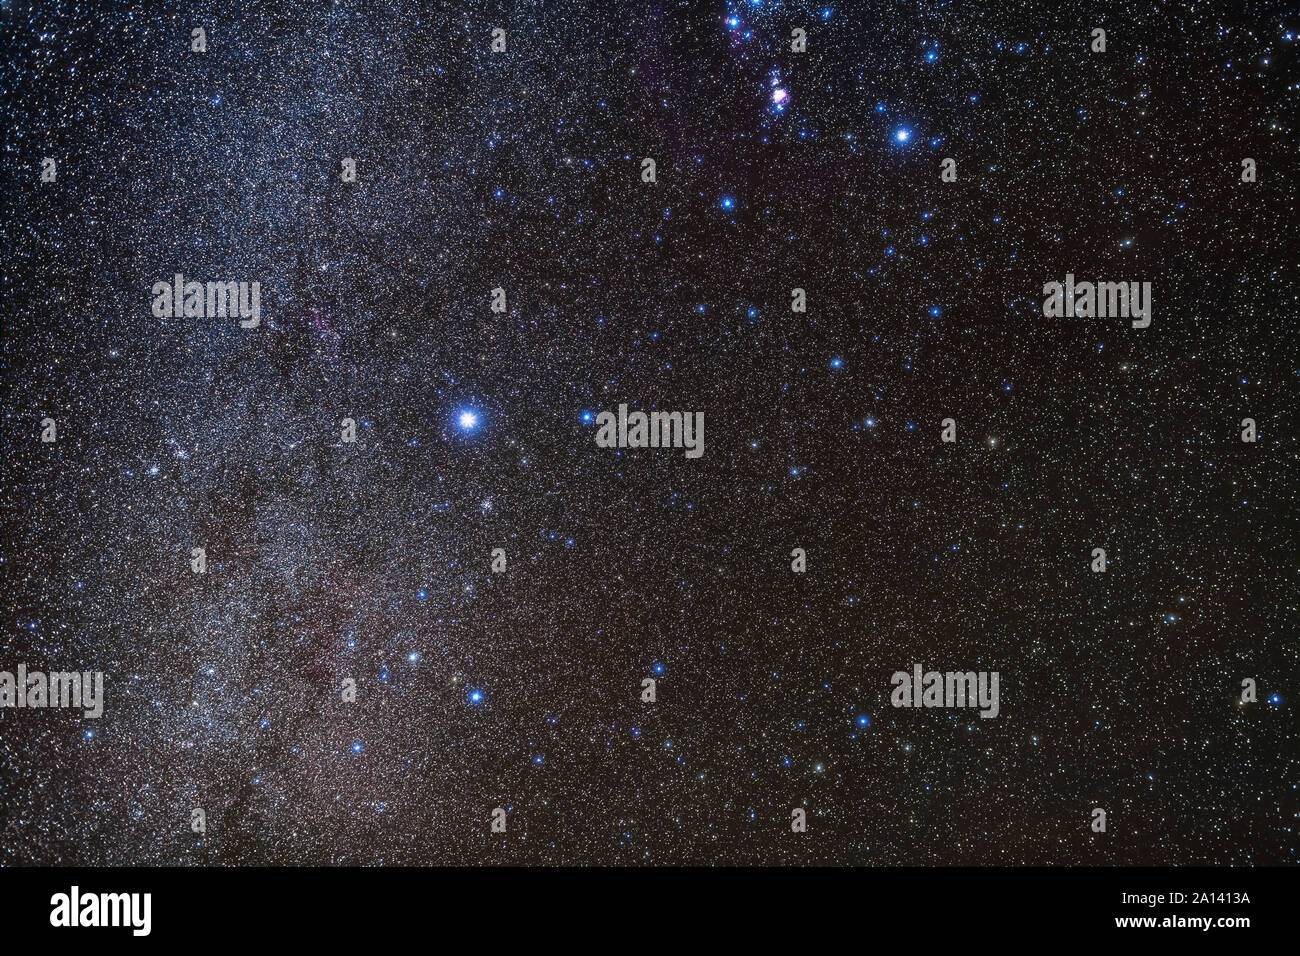 Orion's companion constellations, Lepus the hare, Columba the dove, and Canis Major. Stock Photo